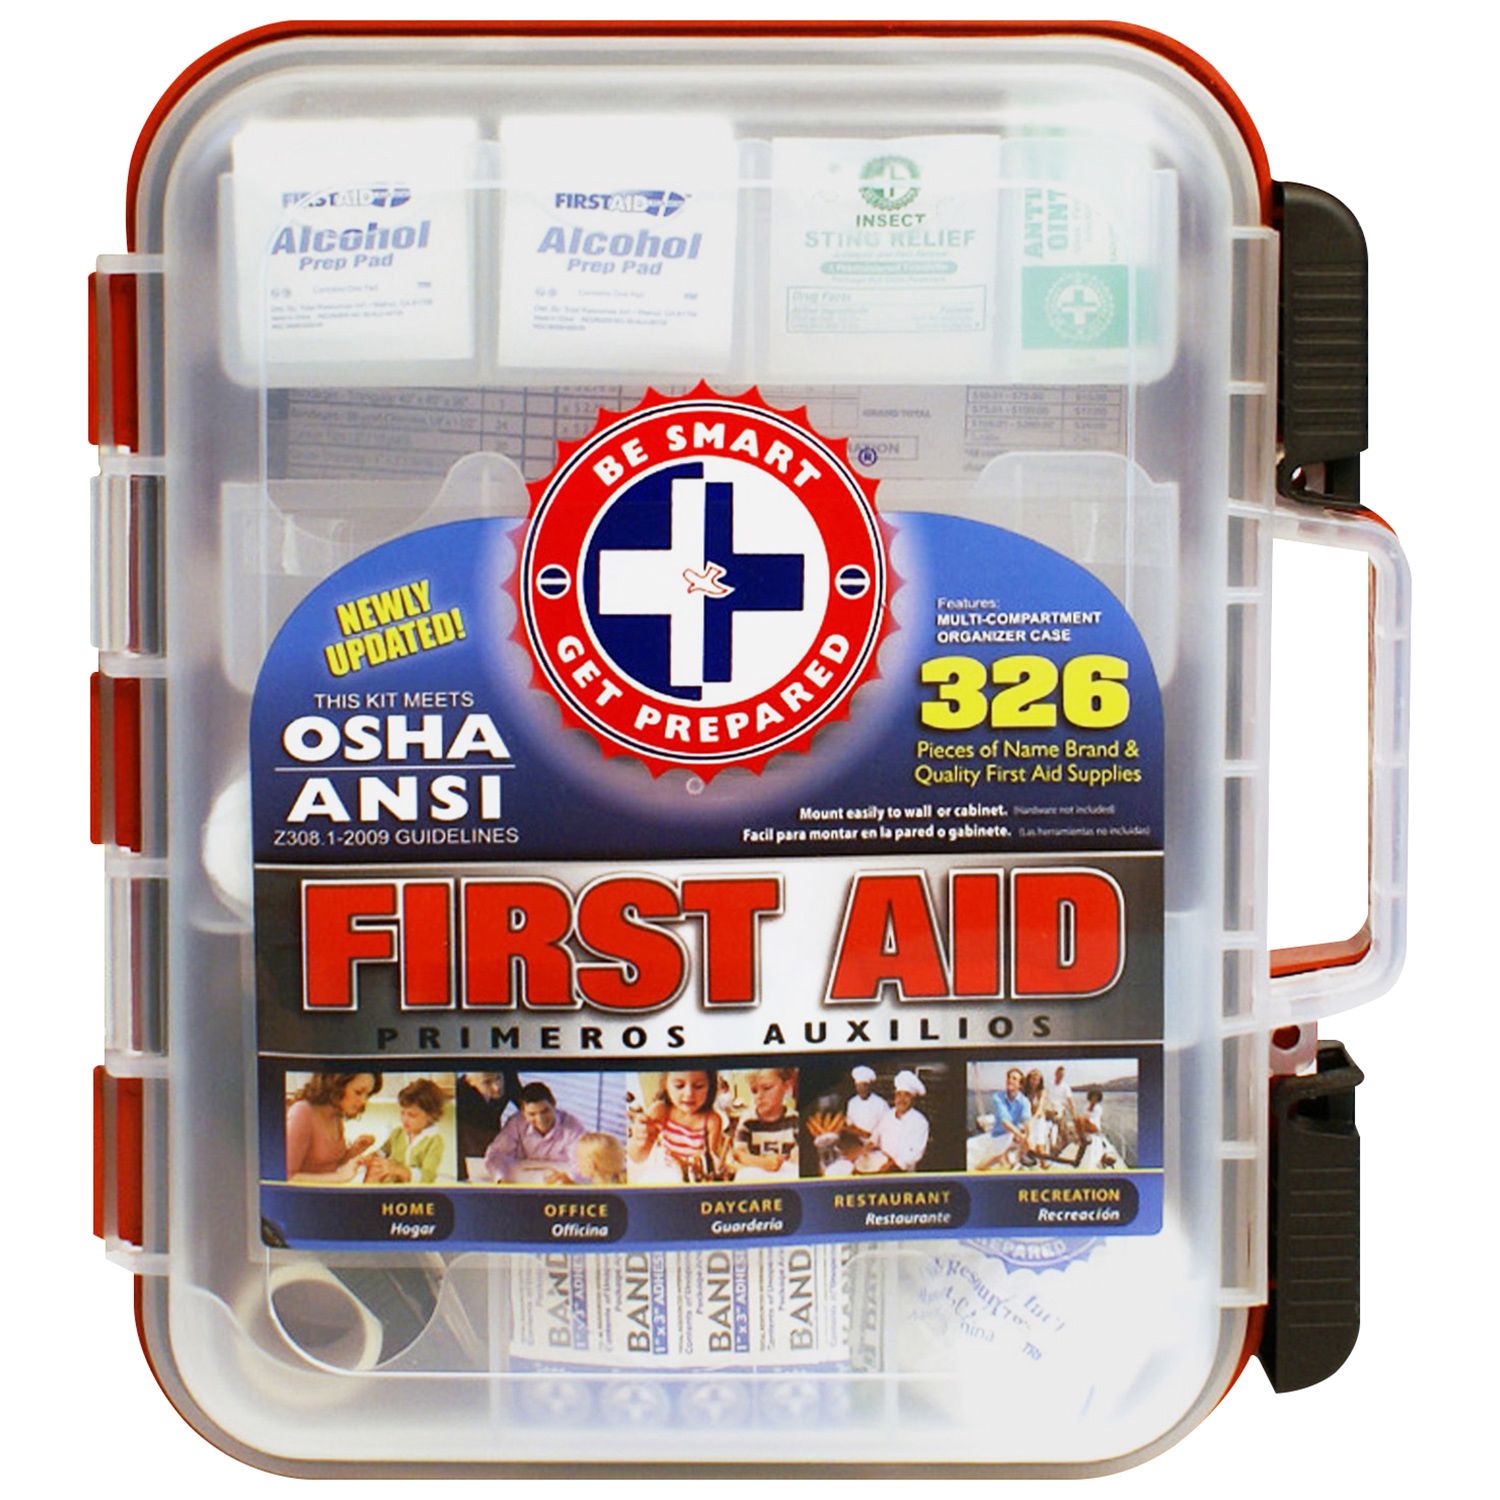 First Aid Kits Archives Osha Safety Manual